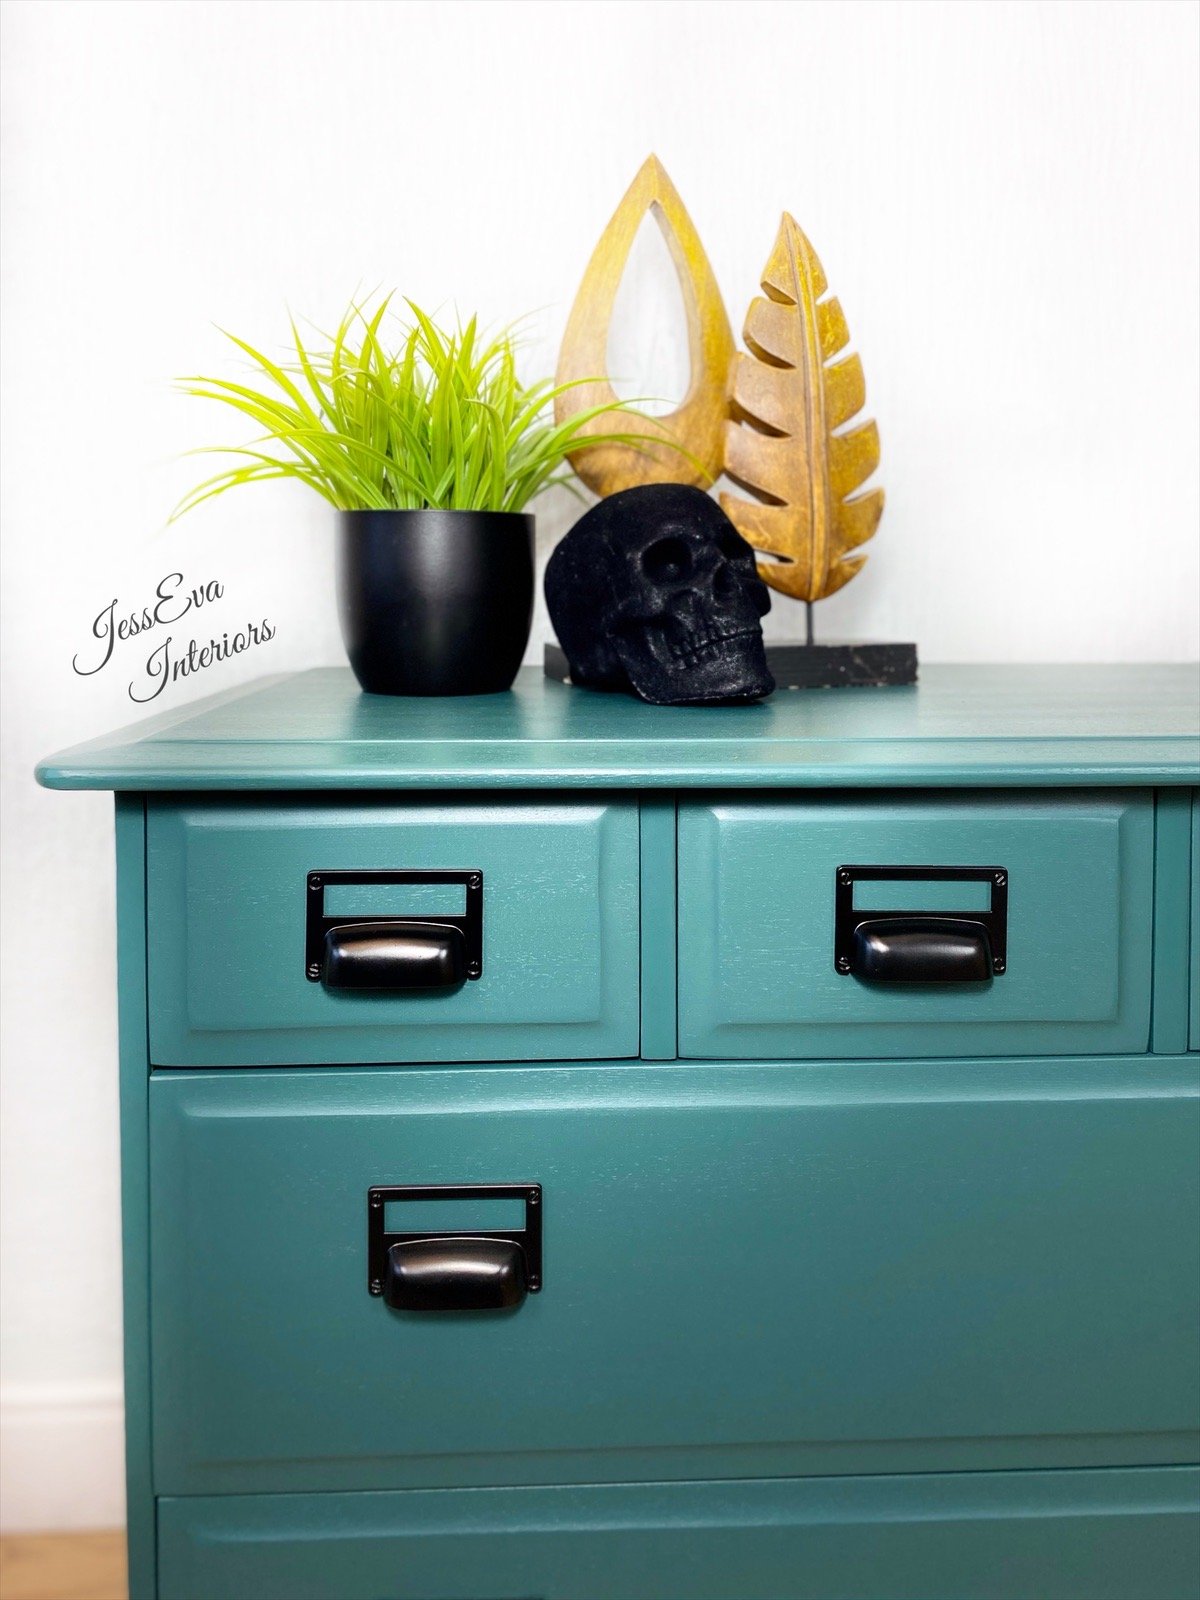 https://assets.bigcartel.com/product_images/9617f670-8fca-4bf4-88a0-0260910afa92/stag-minstrel-chest-of-drawers-large-bedside-cabinet-painted-in-dark-green-with-cup-handles.jpg?auto=format&fit=max&w=2000